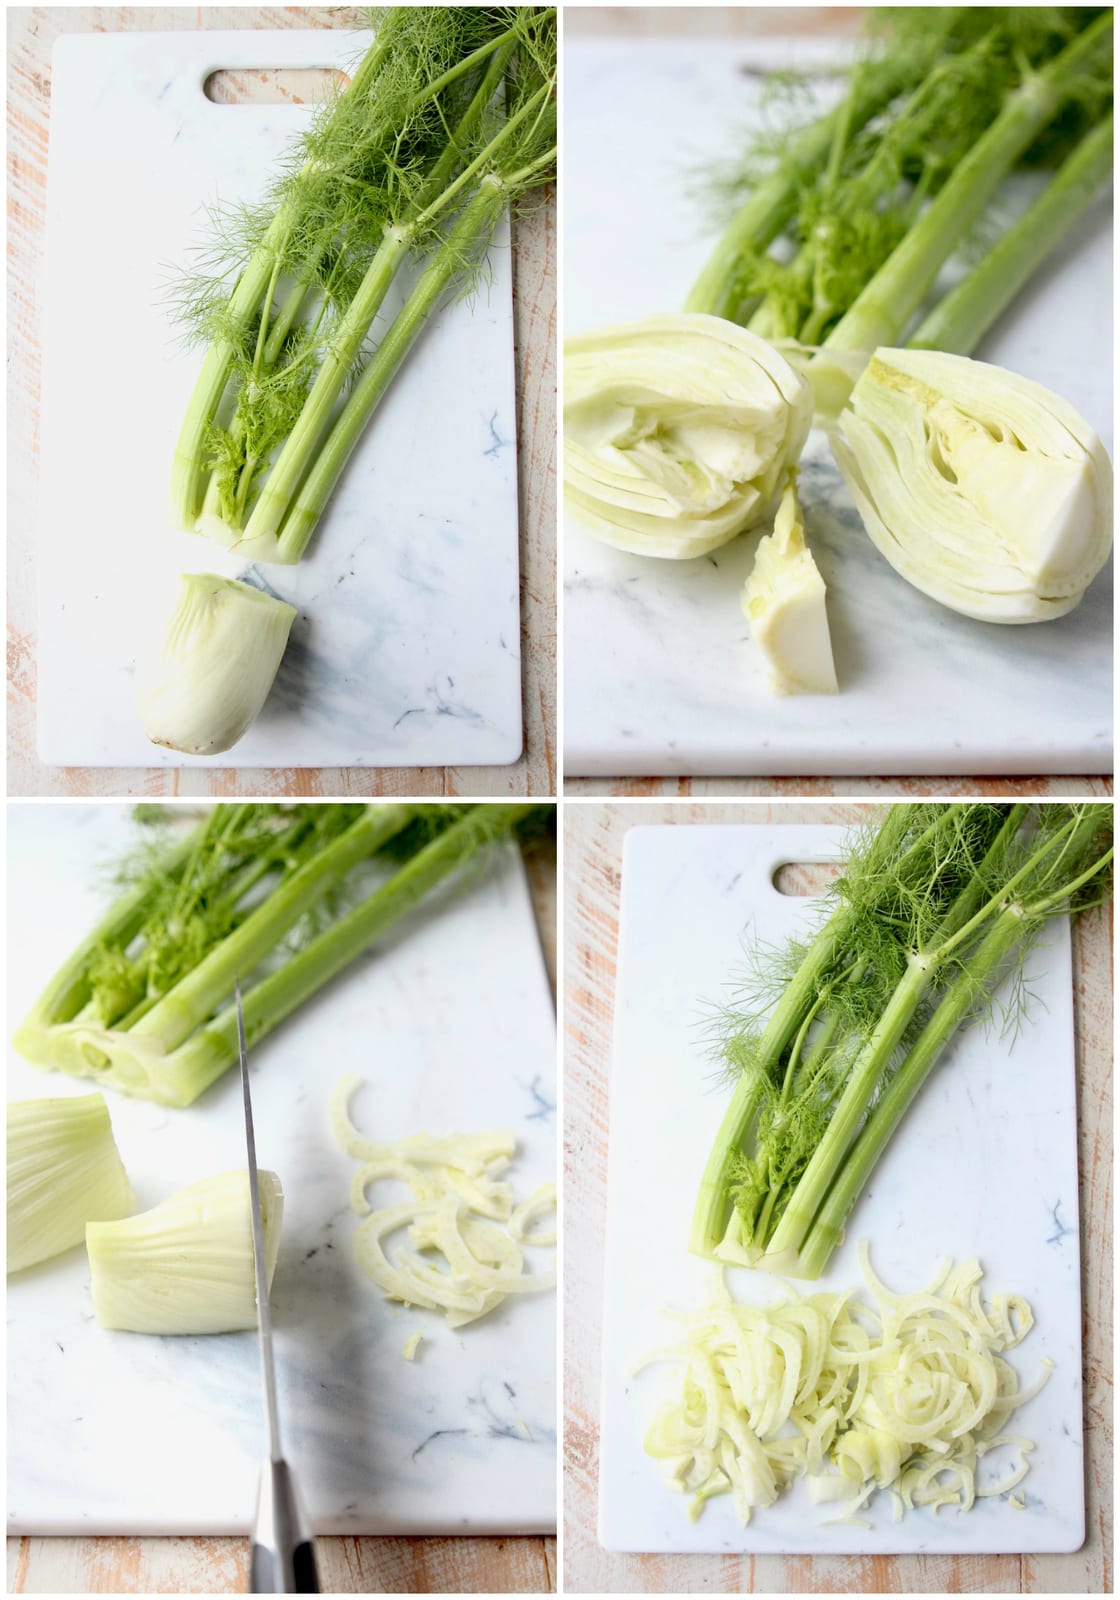 How to chop fennel instructional images